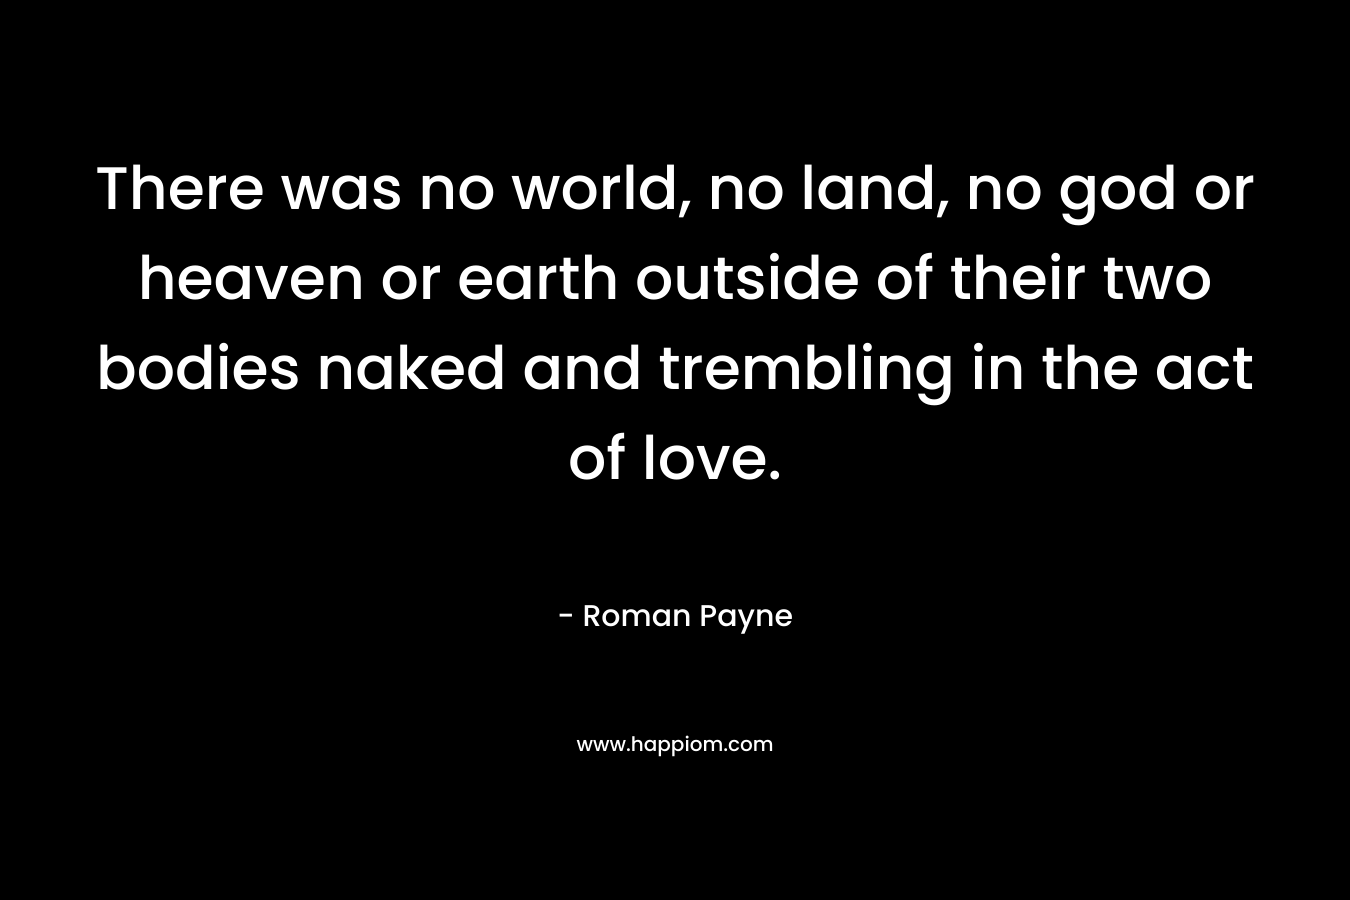 There was no world, no land, no god or heaven or earth outside of their two bodies naked and trembling in the act of love.